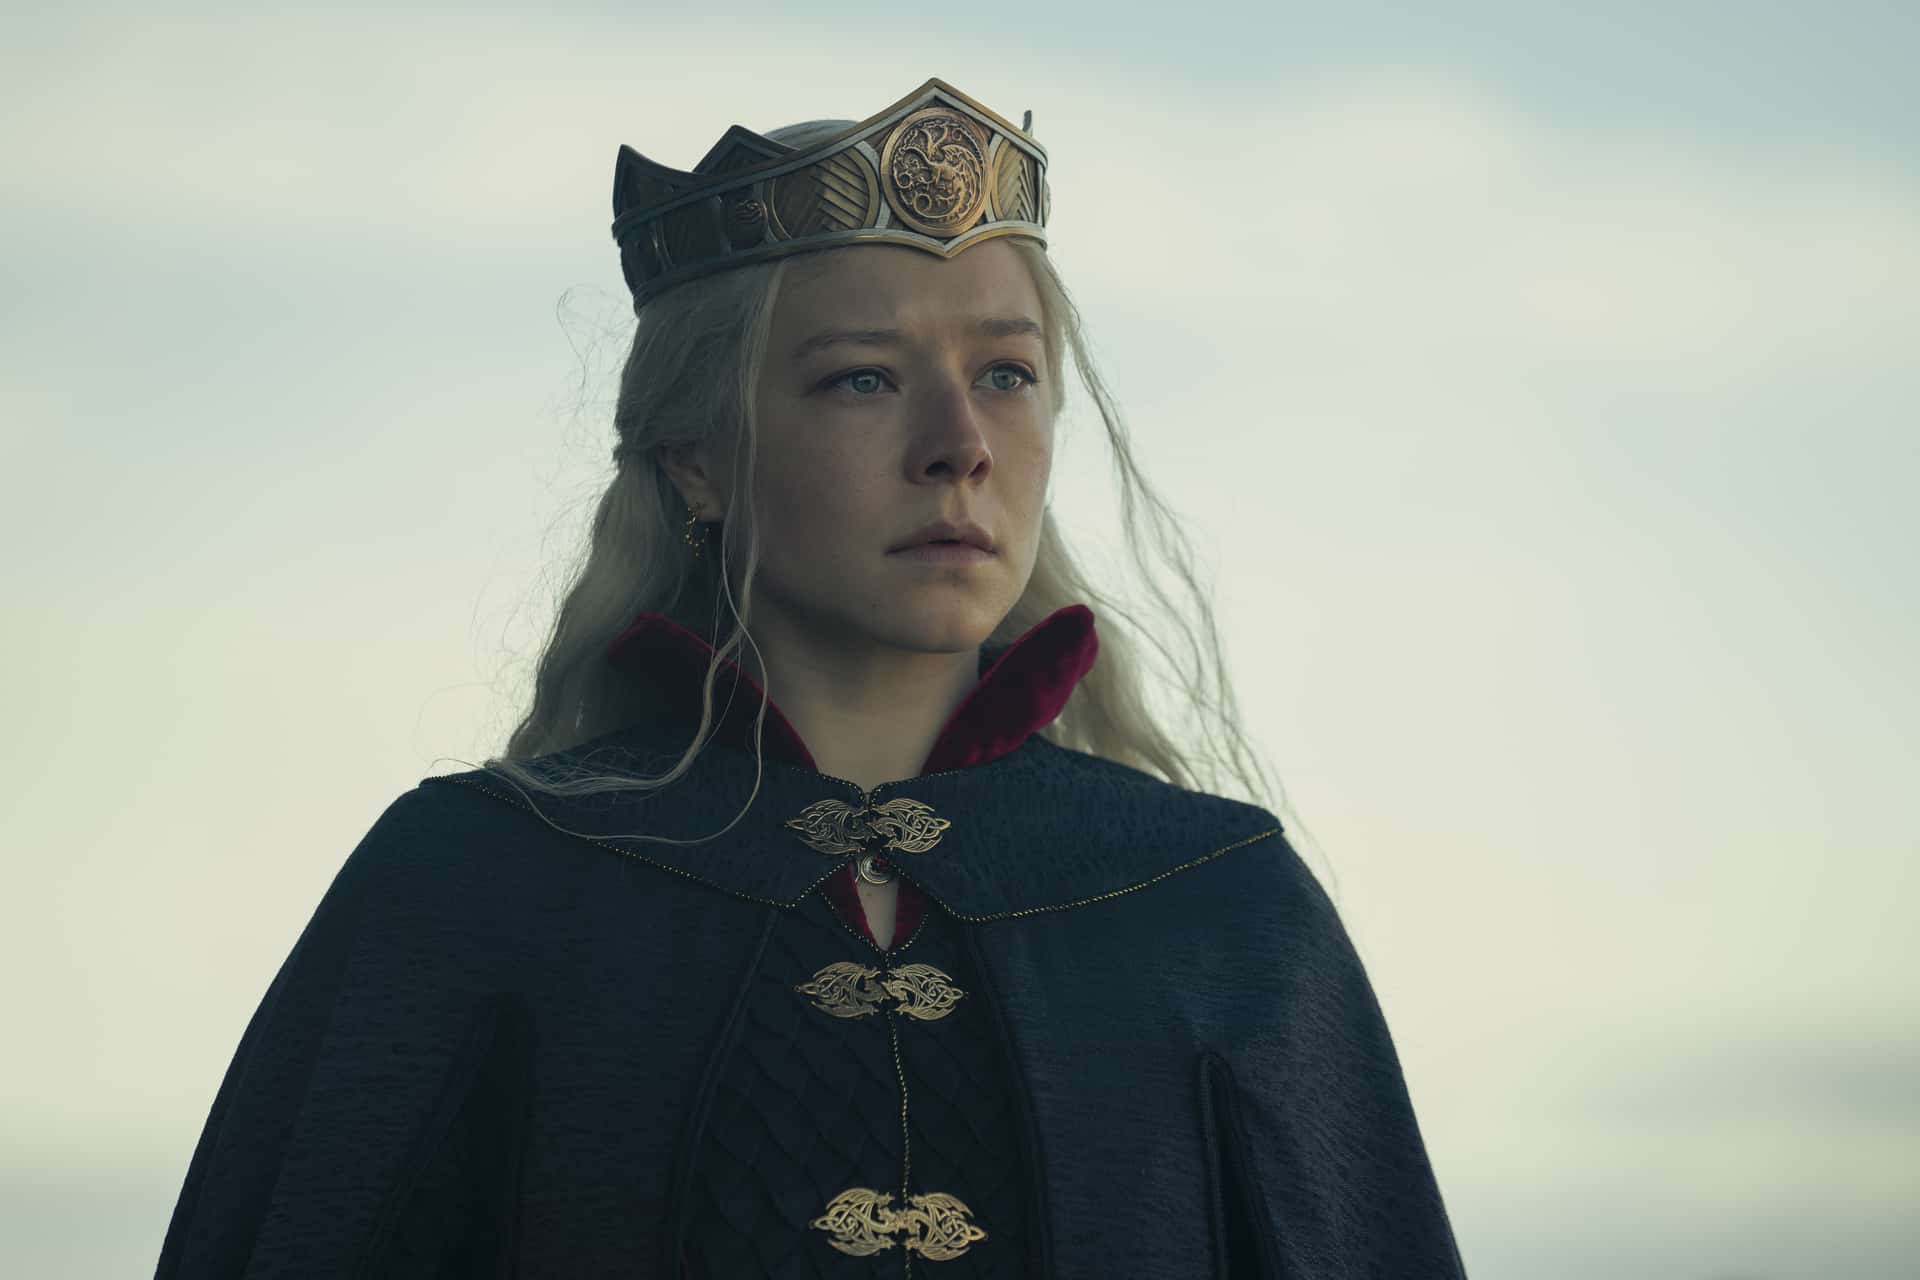 Rhaenyra looking solemn in a crown and cape